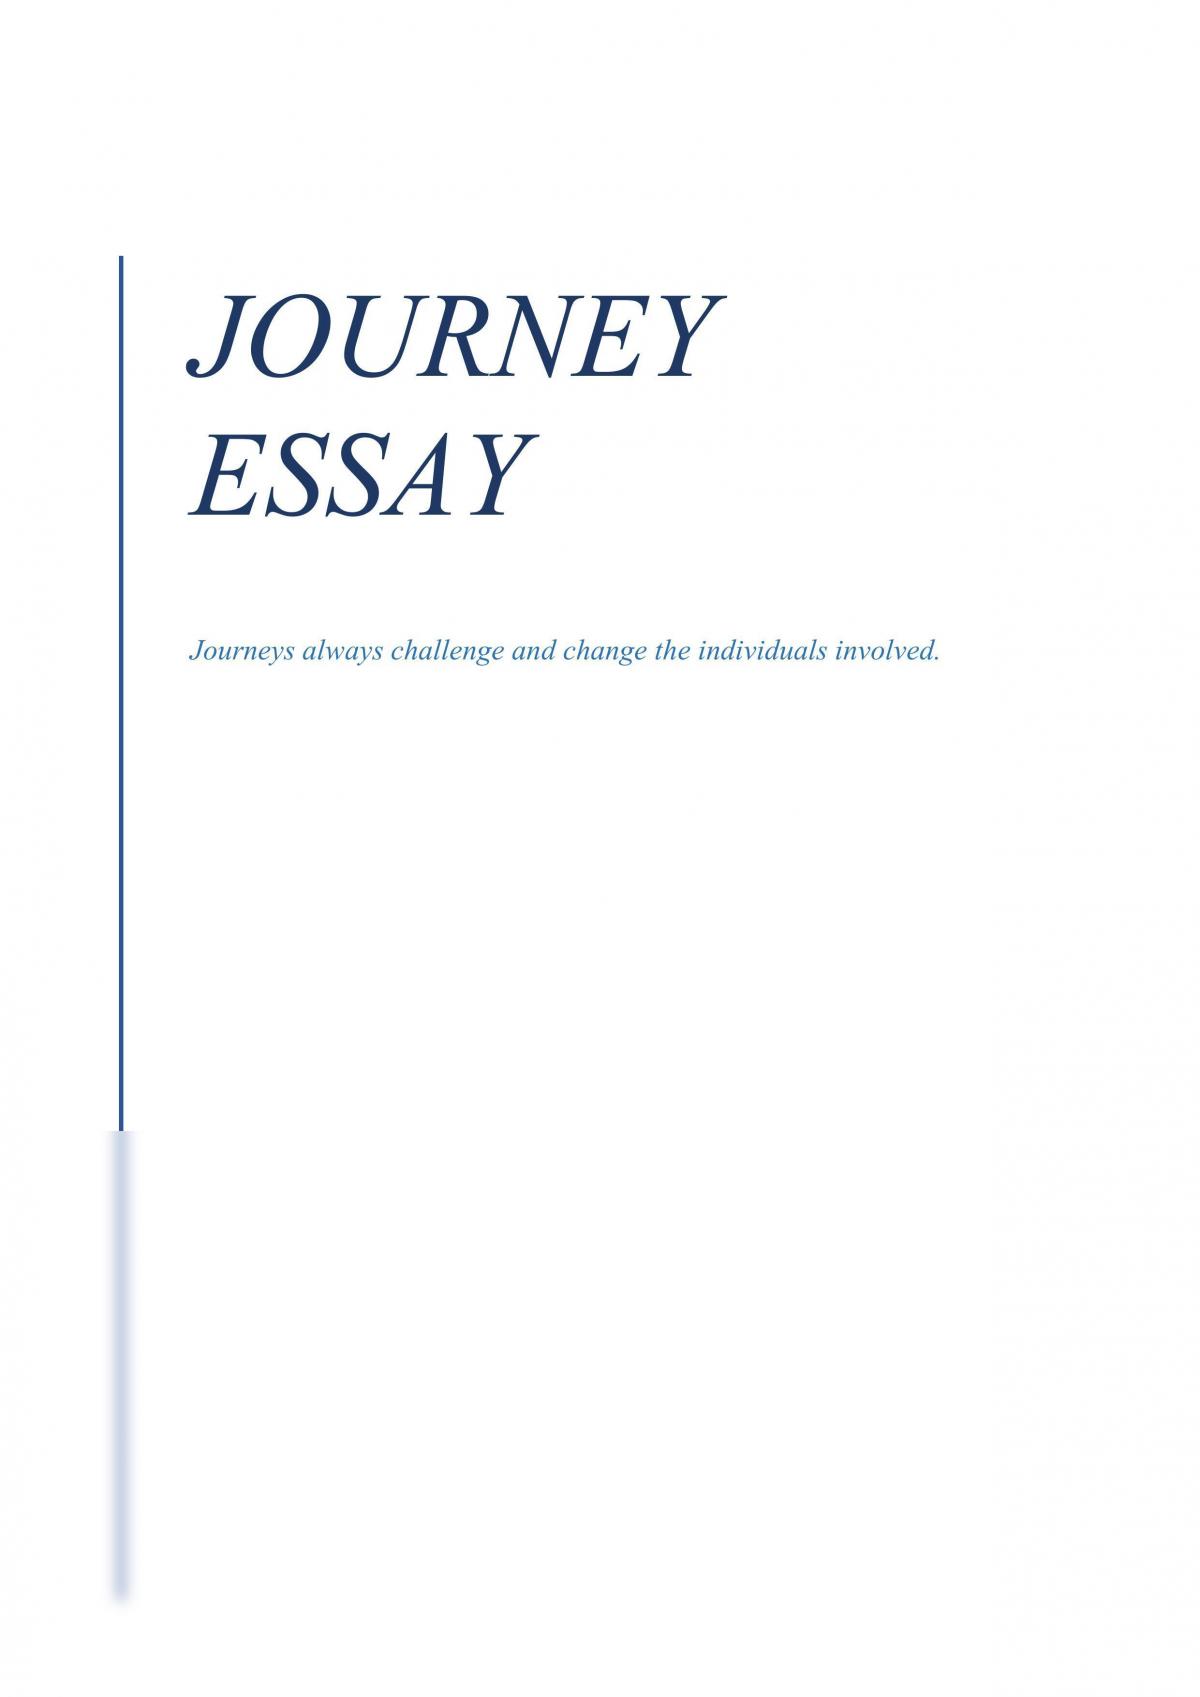 journey by essay